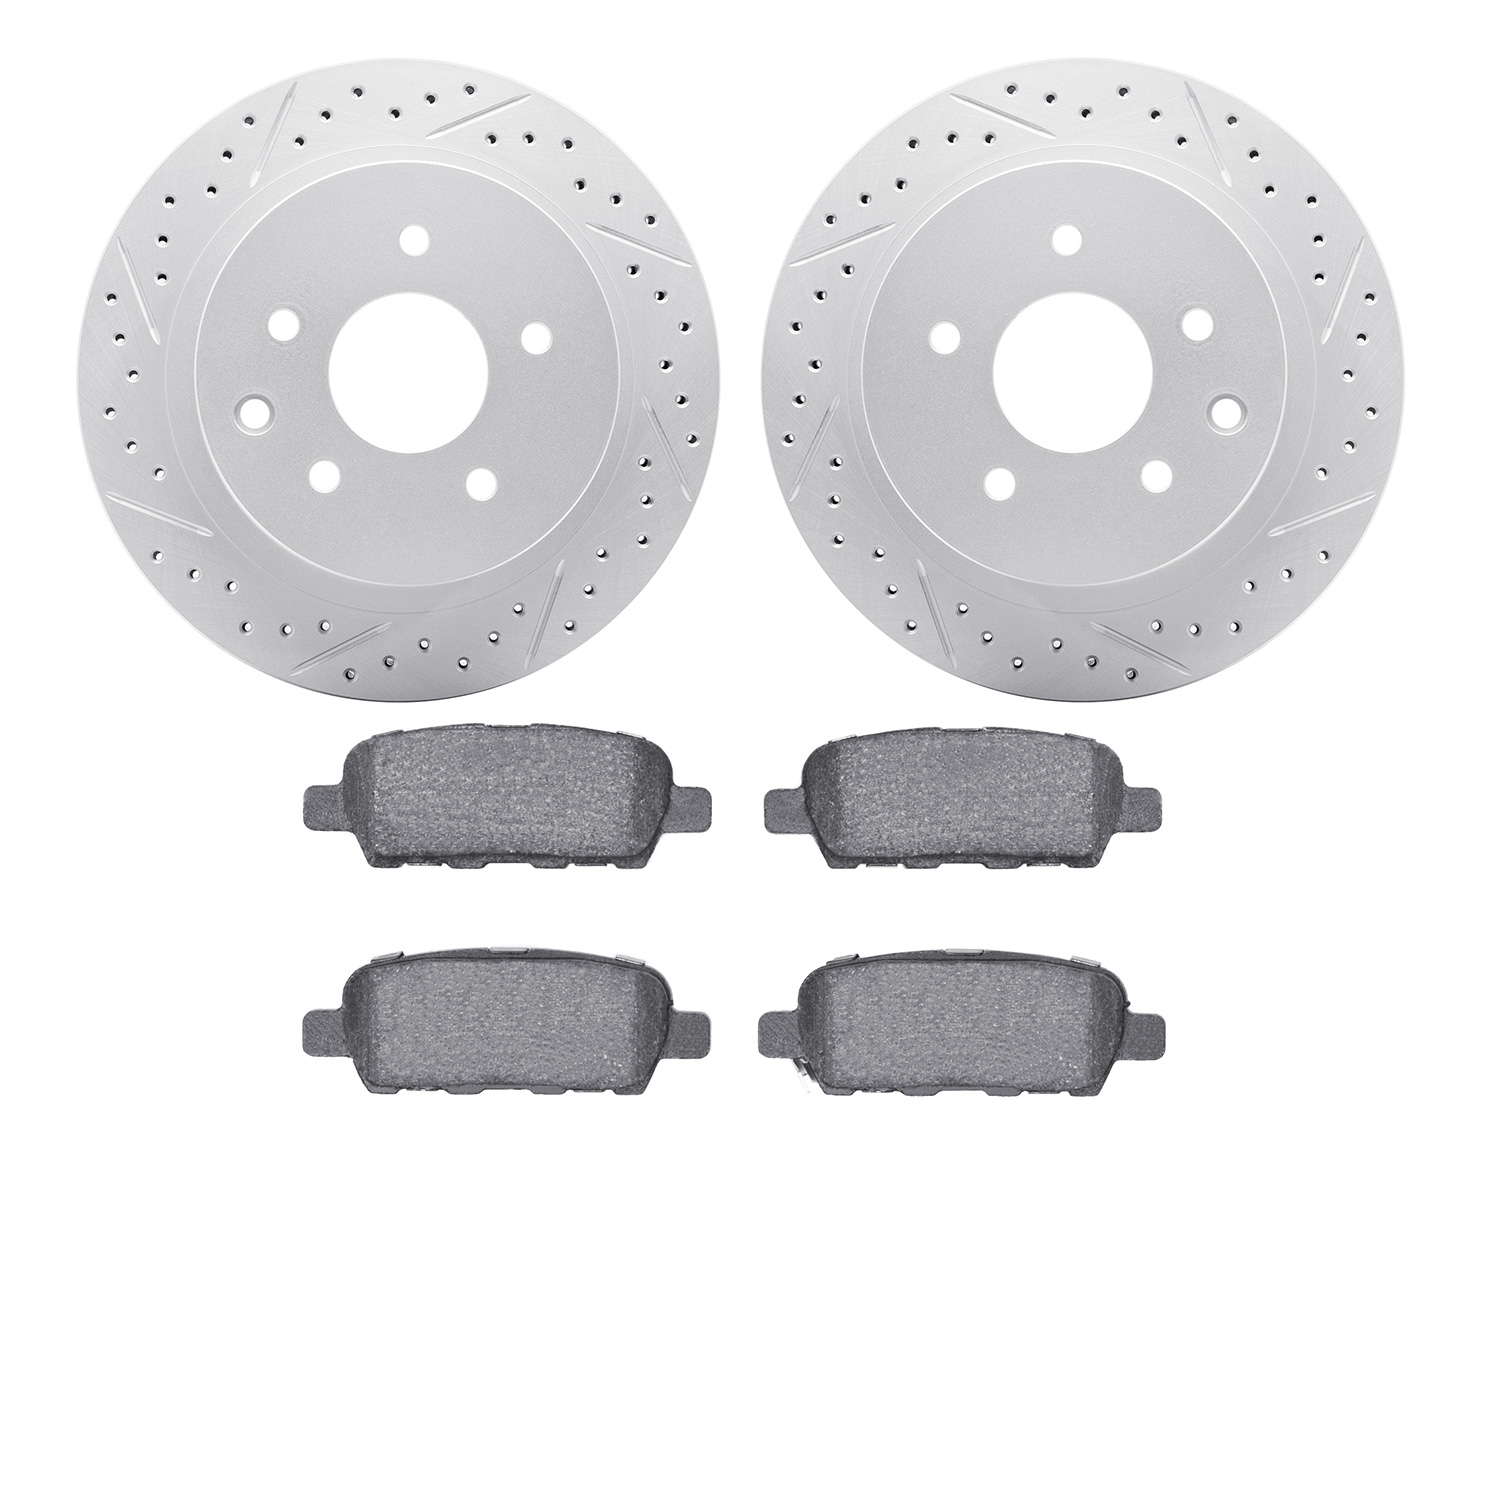 2502-67099 Geoperformance Drilled/Slotted Rotors w/5000 Advanced Brake Pads Kit, Fits Select Multiple Makes/Models, Position: Re